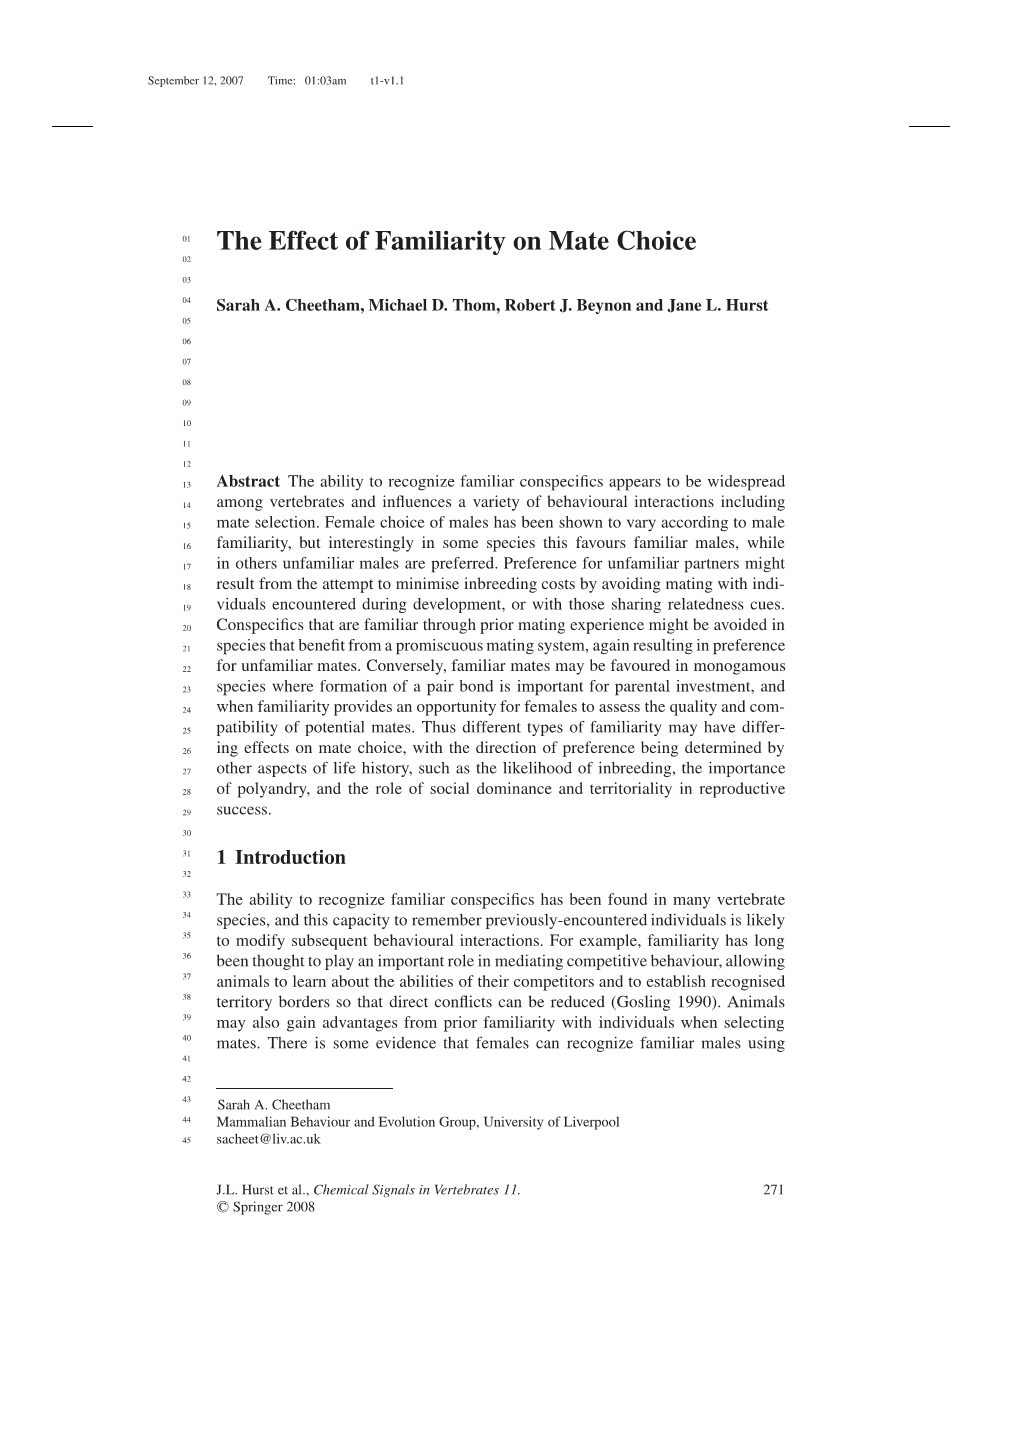 The Effect of Familiarity on Mate Choice 02